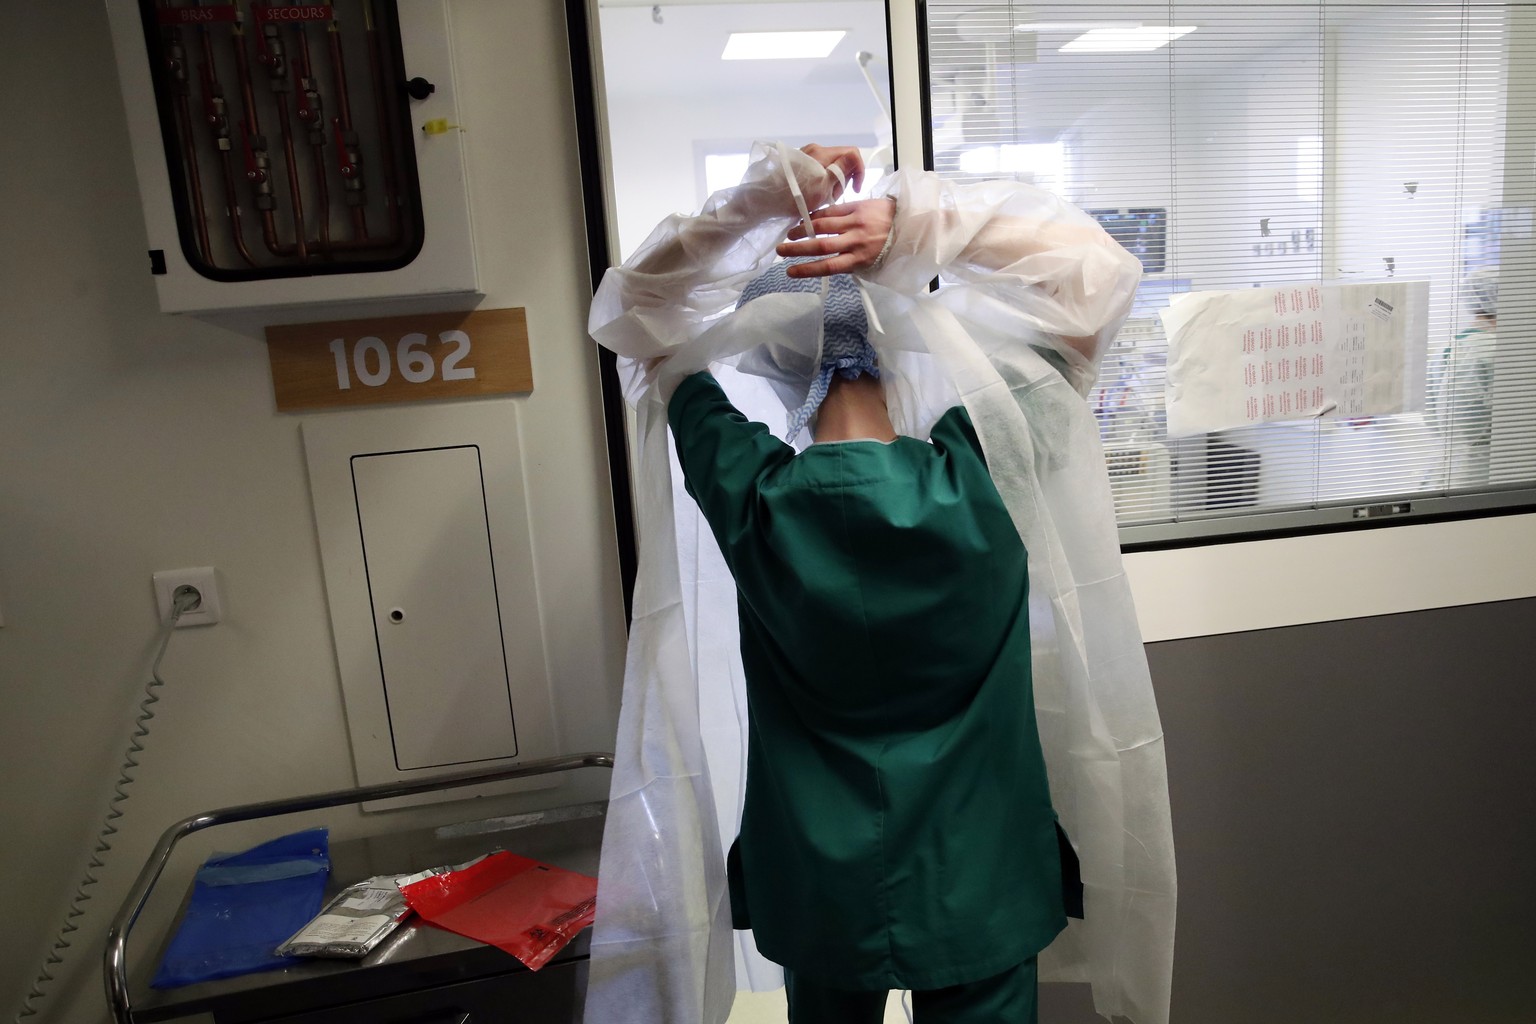 A medical worker prepares to tend to a patient affected with the COVID-19 in the Amiens Picardie hospital Tuesday, March 30, 2021 in Amiens, 160 km (100 miles) north of Paris. France is now facing a d ...